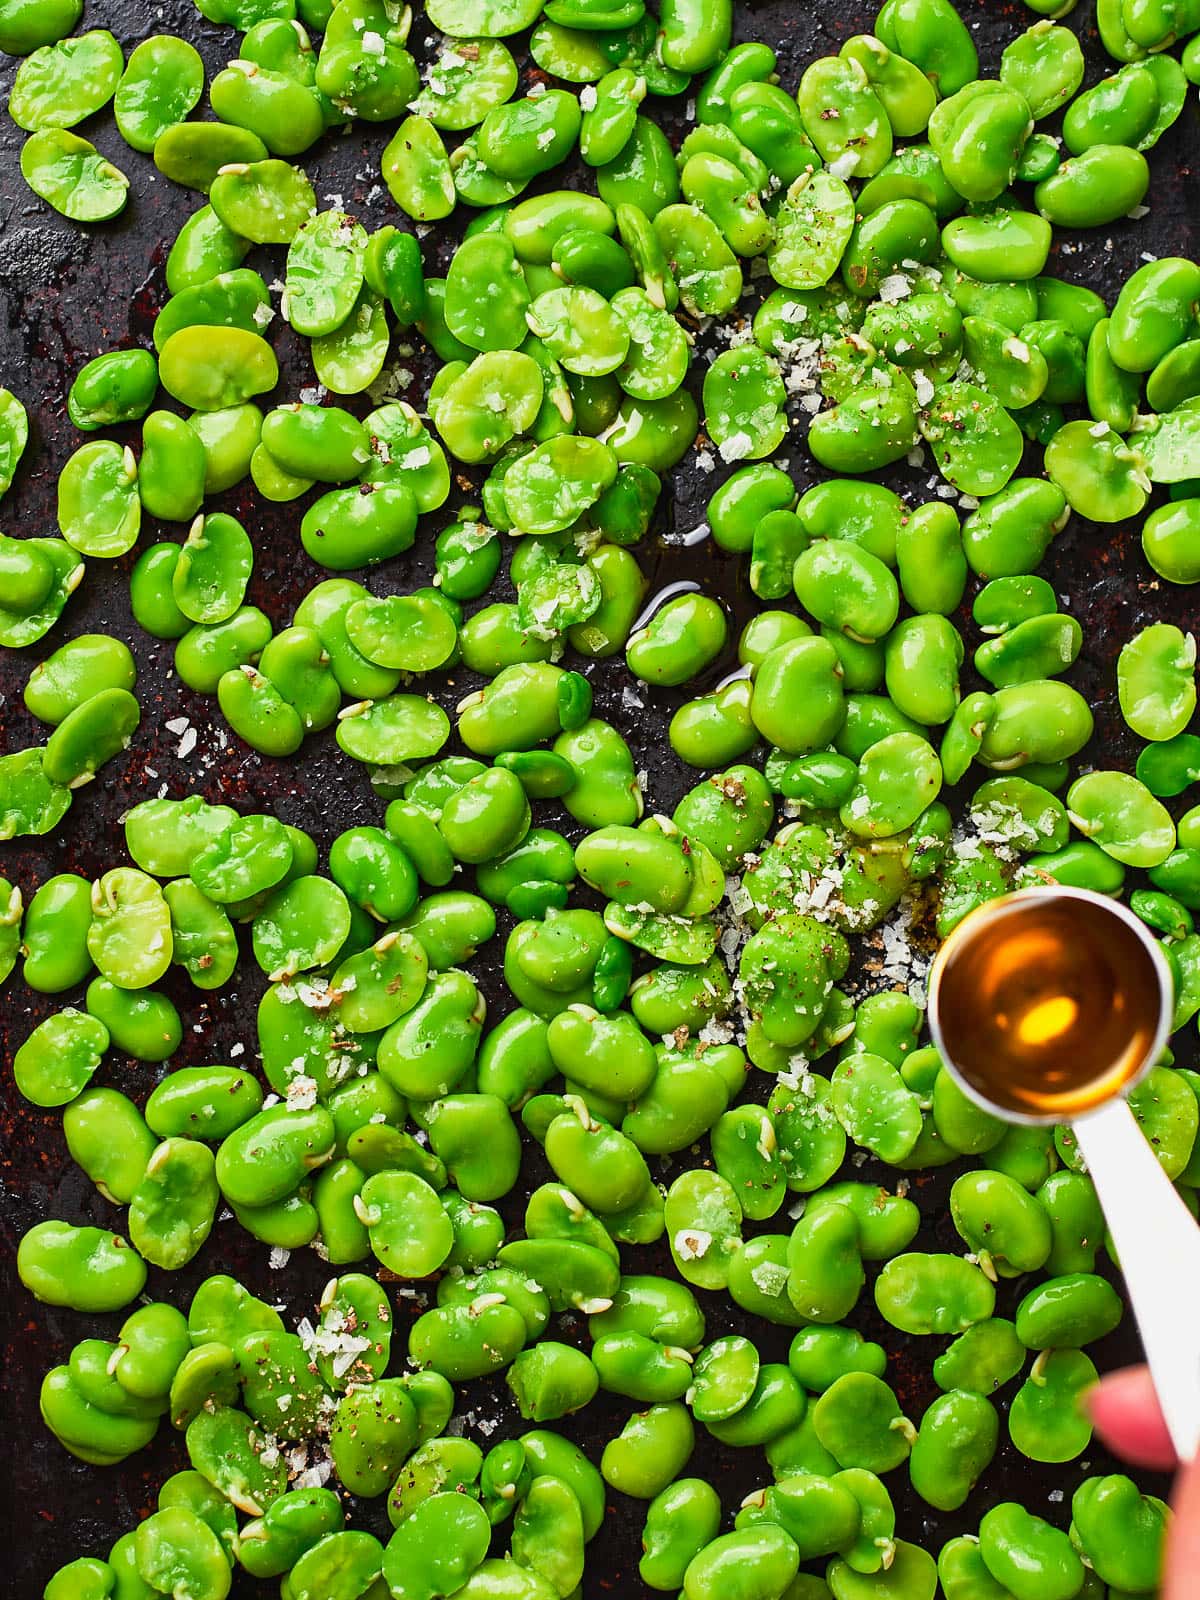 Adding oil to broad beans